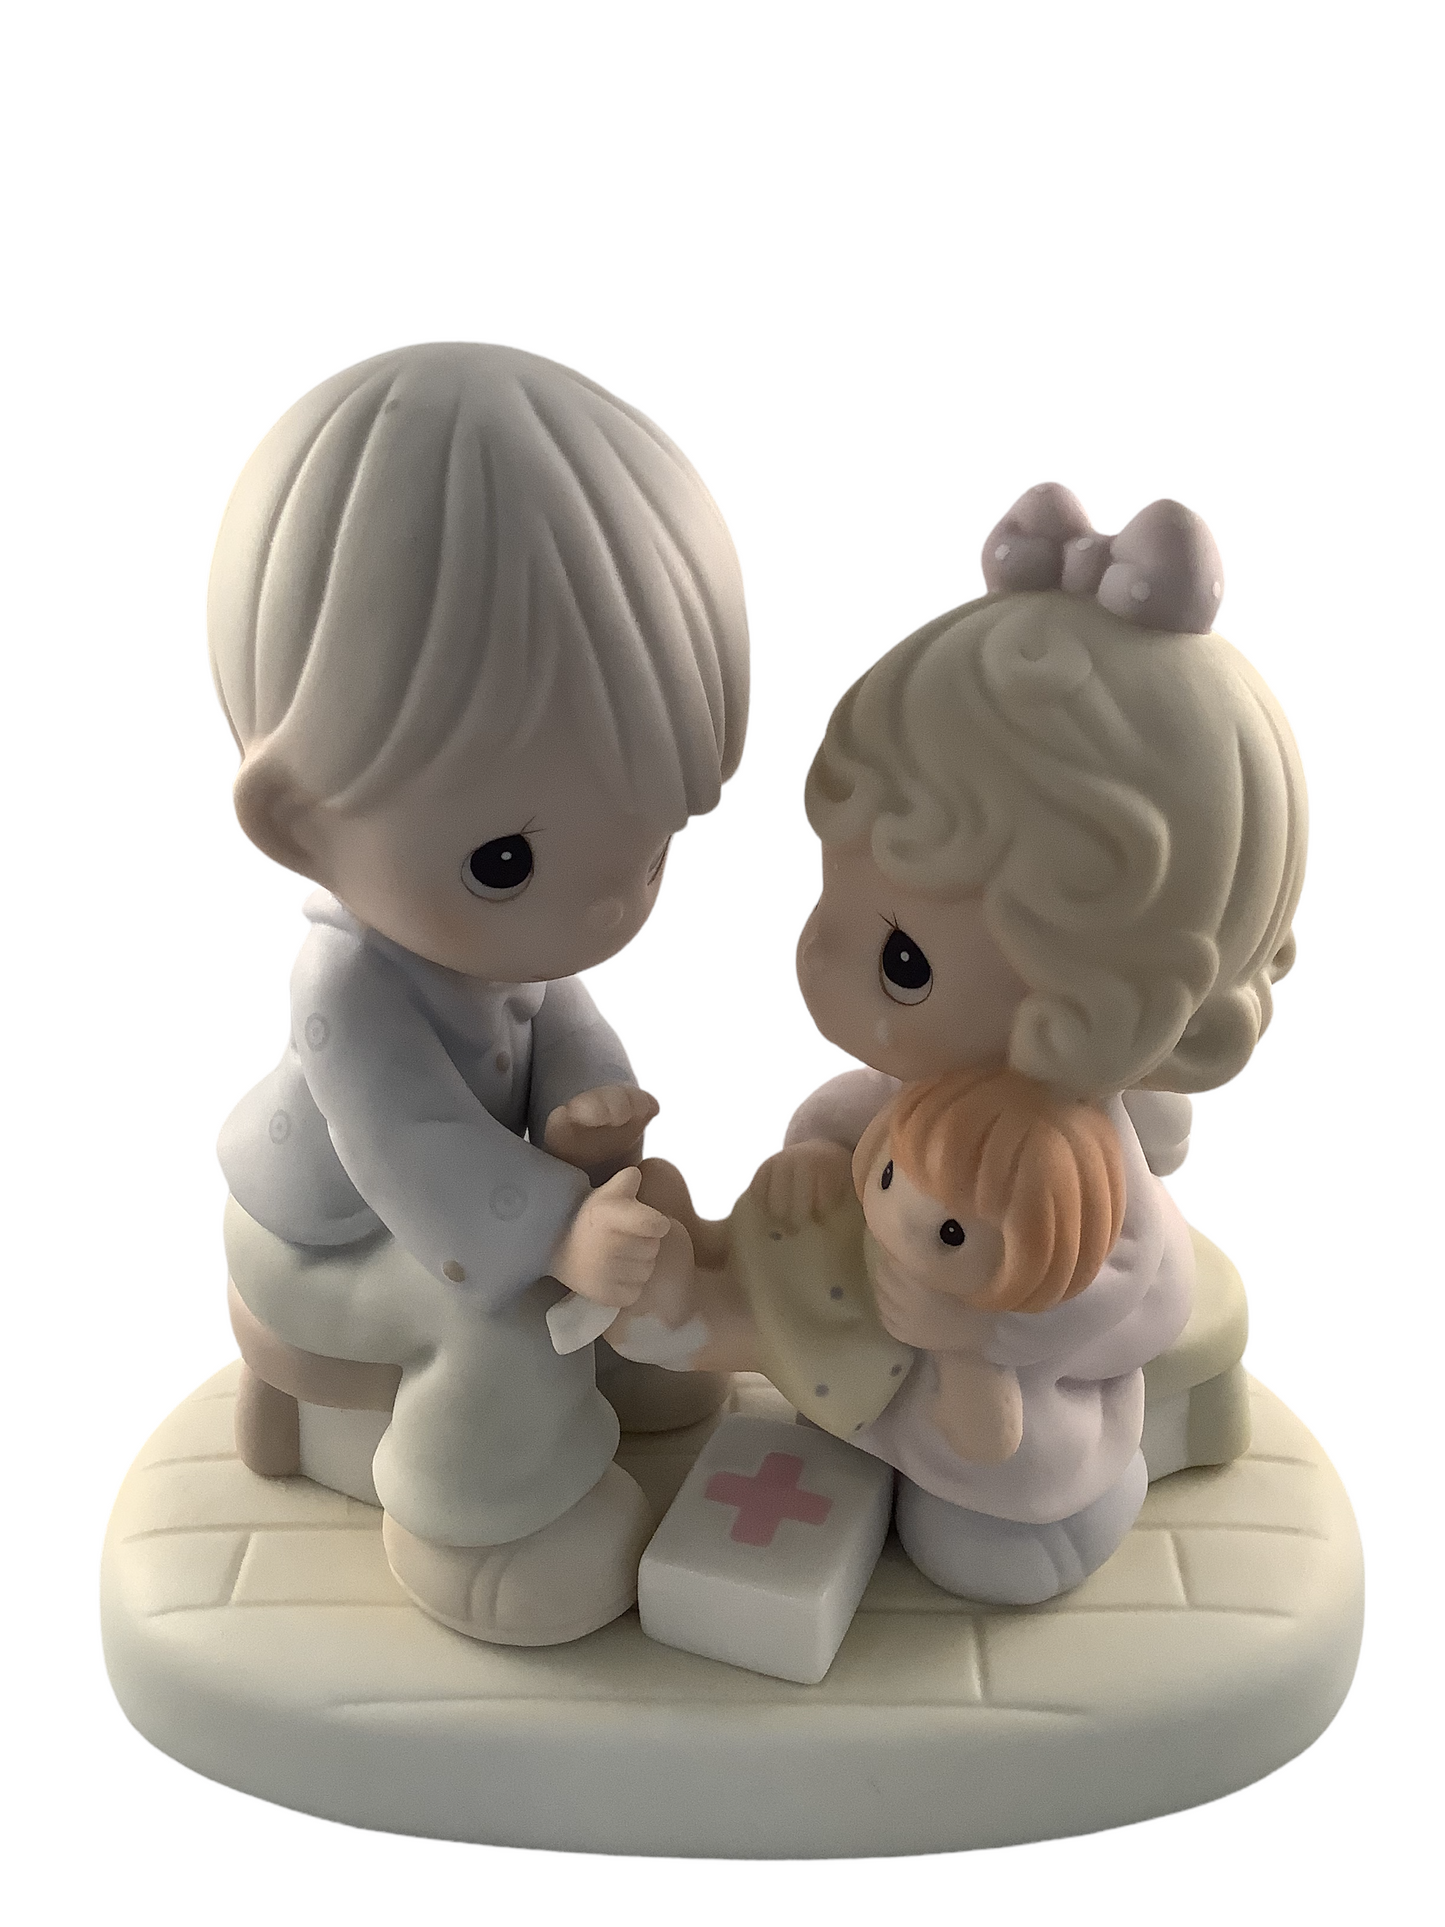 You Are Always There For Me - Precious Moment Figurine